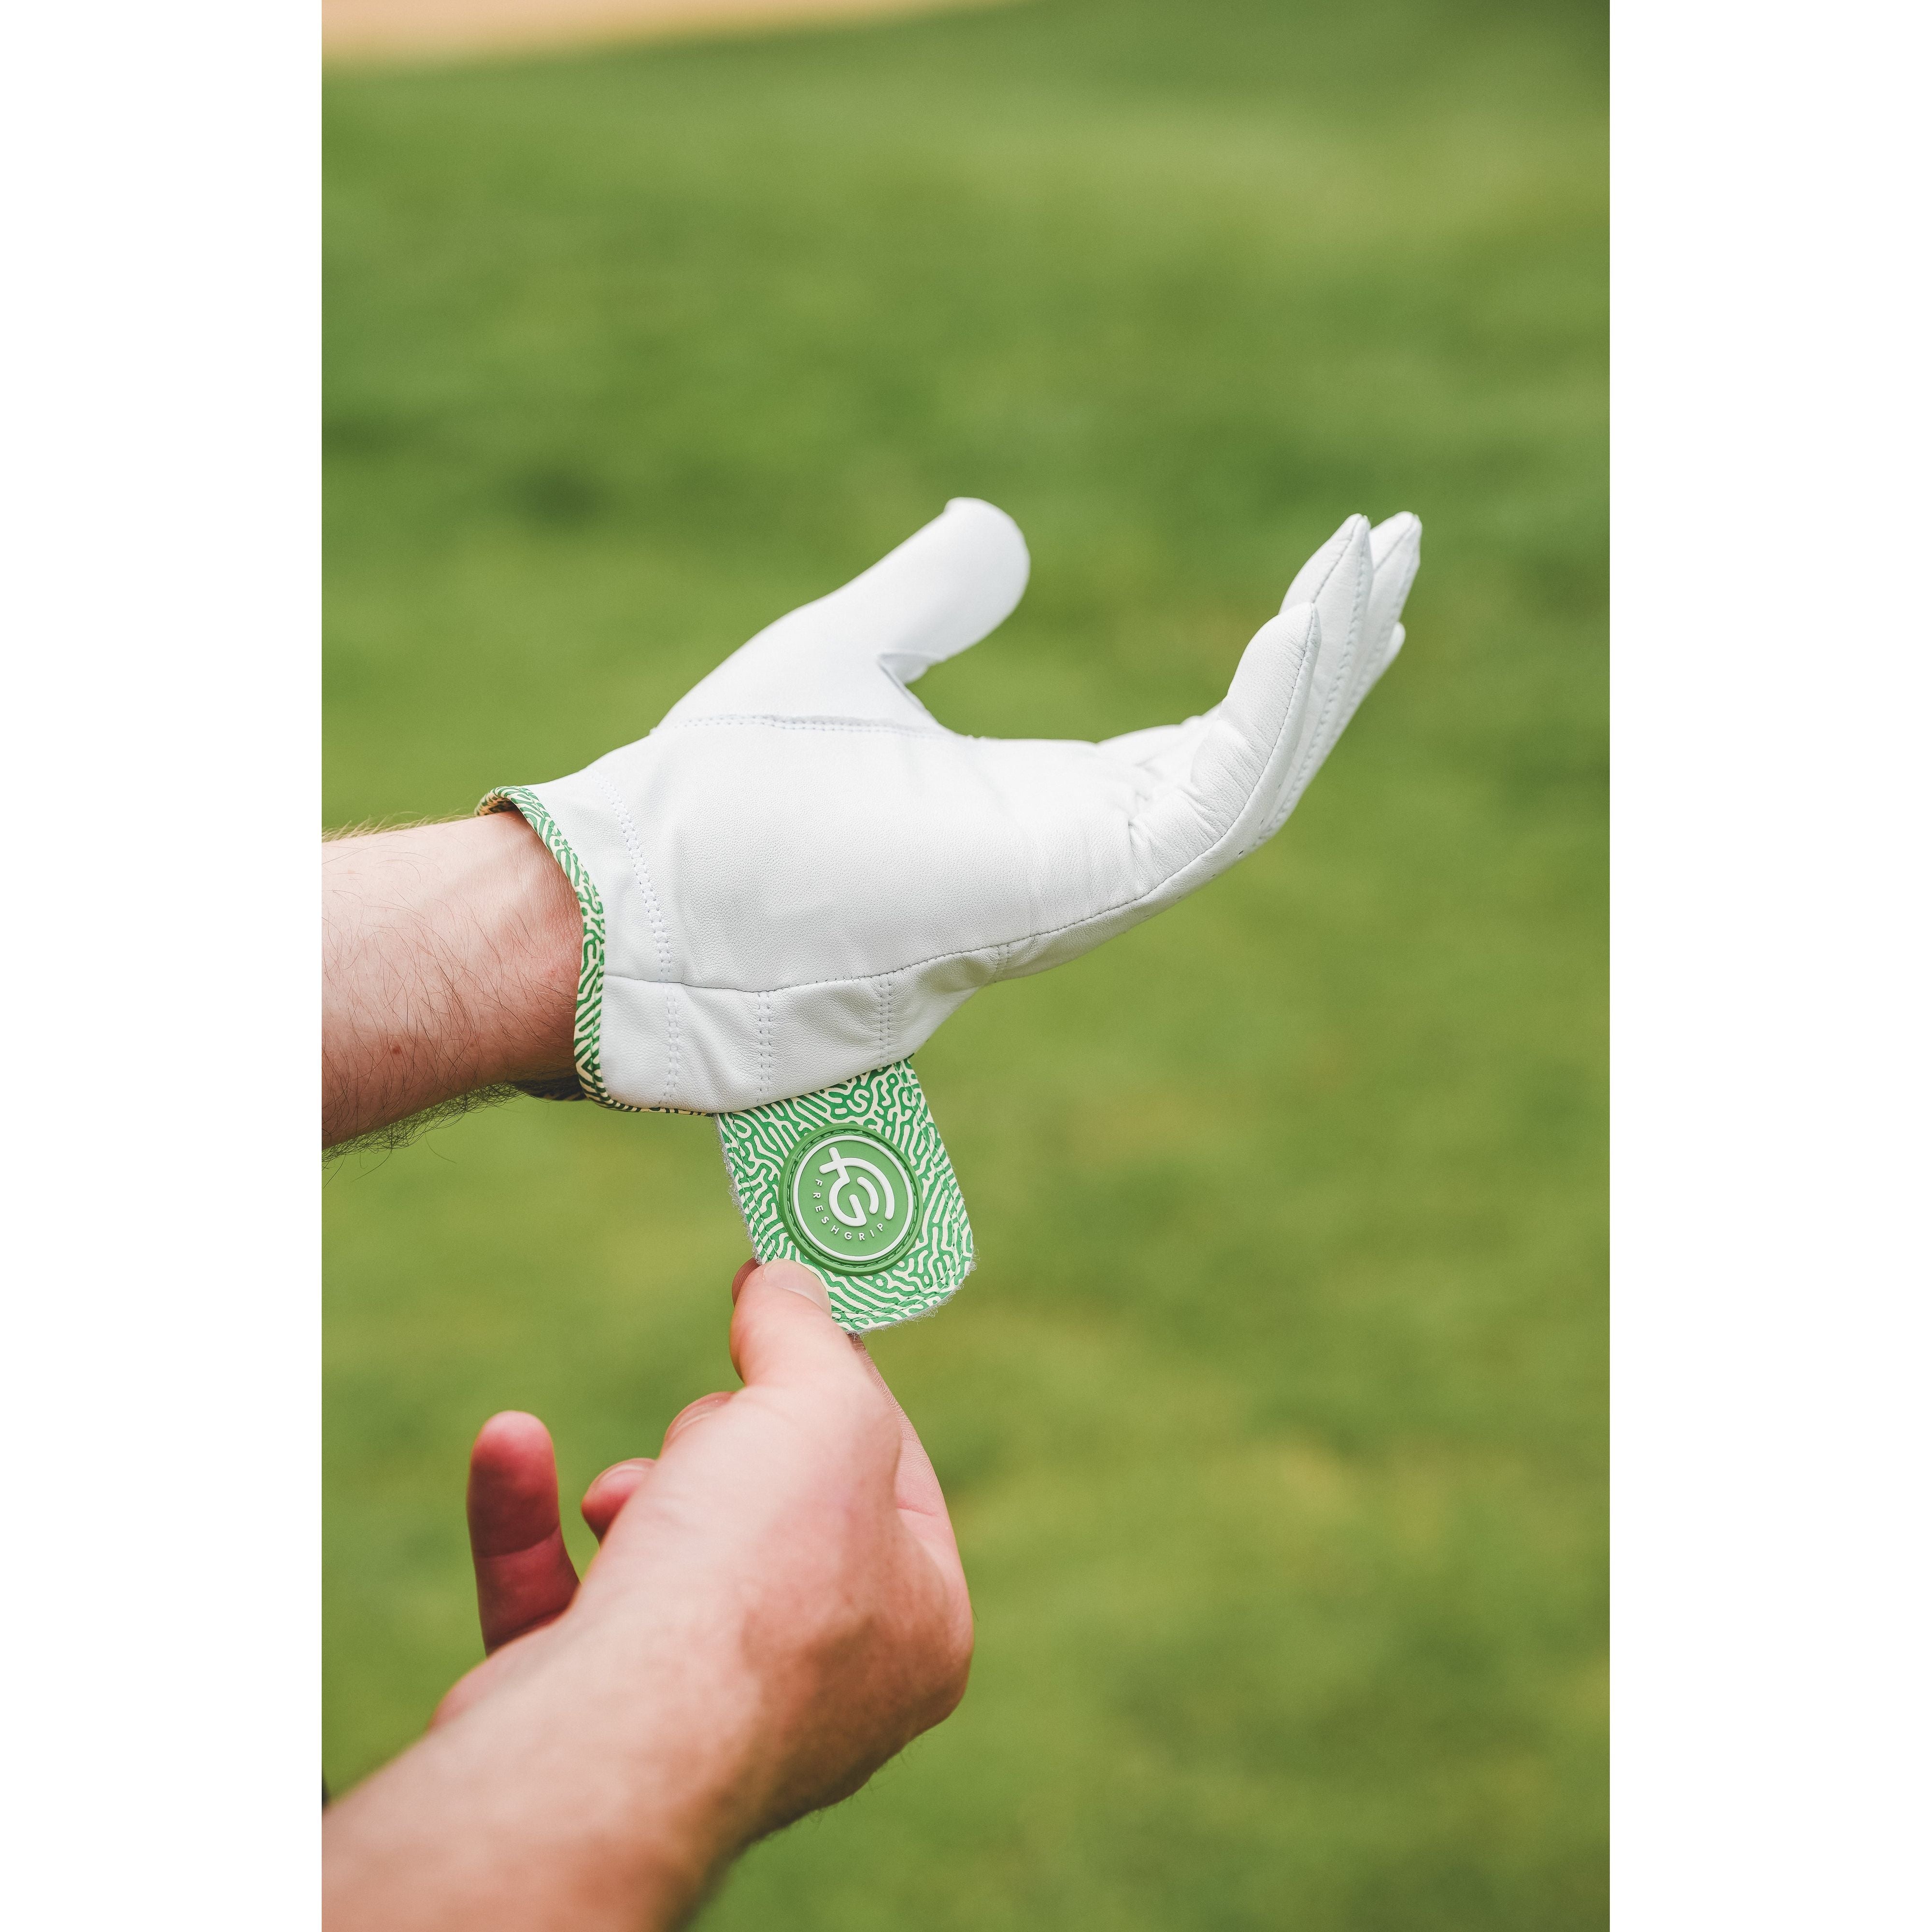 Contours Golf Glove | Players Edition